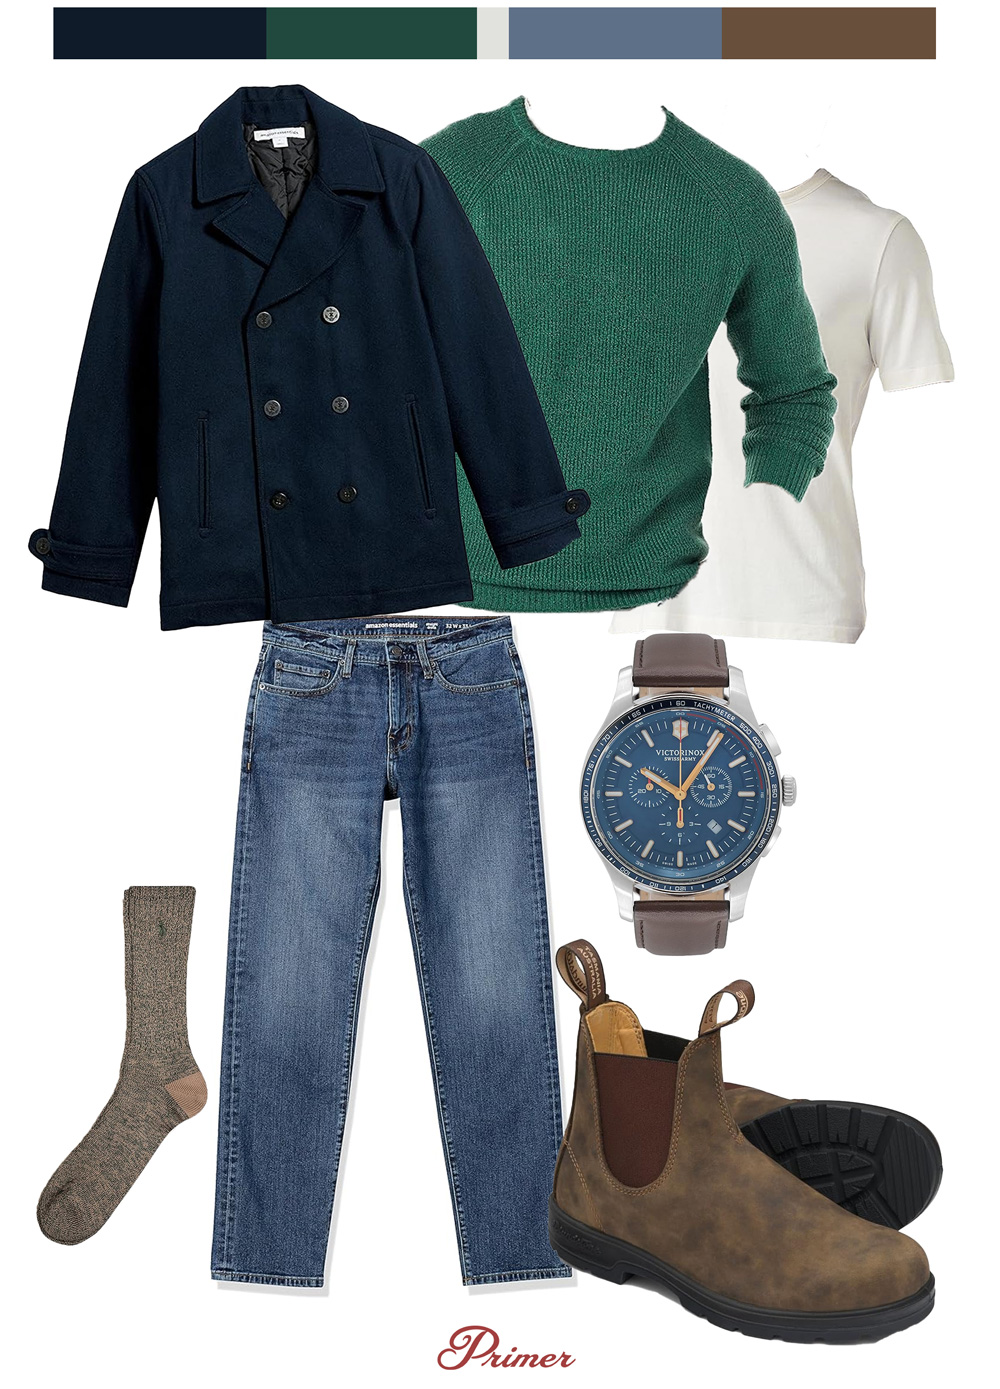 A clothing layout with a navy pea coat, green crewneck sweater, white t-shirt, blue jeans, brown wool socks, a brown leather-strapped wristwatch with a blue face, and brown Chelsea boots, arranged on a white background with the brand 'Primer' at the bottom.